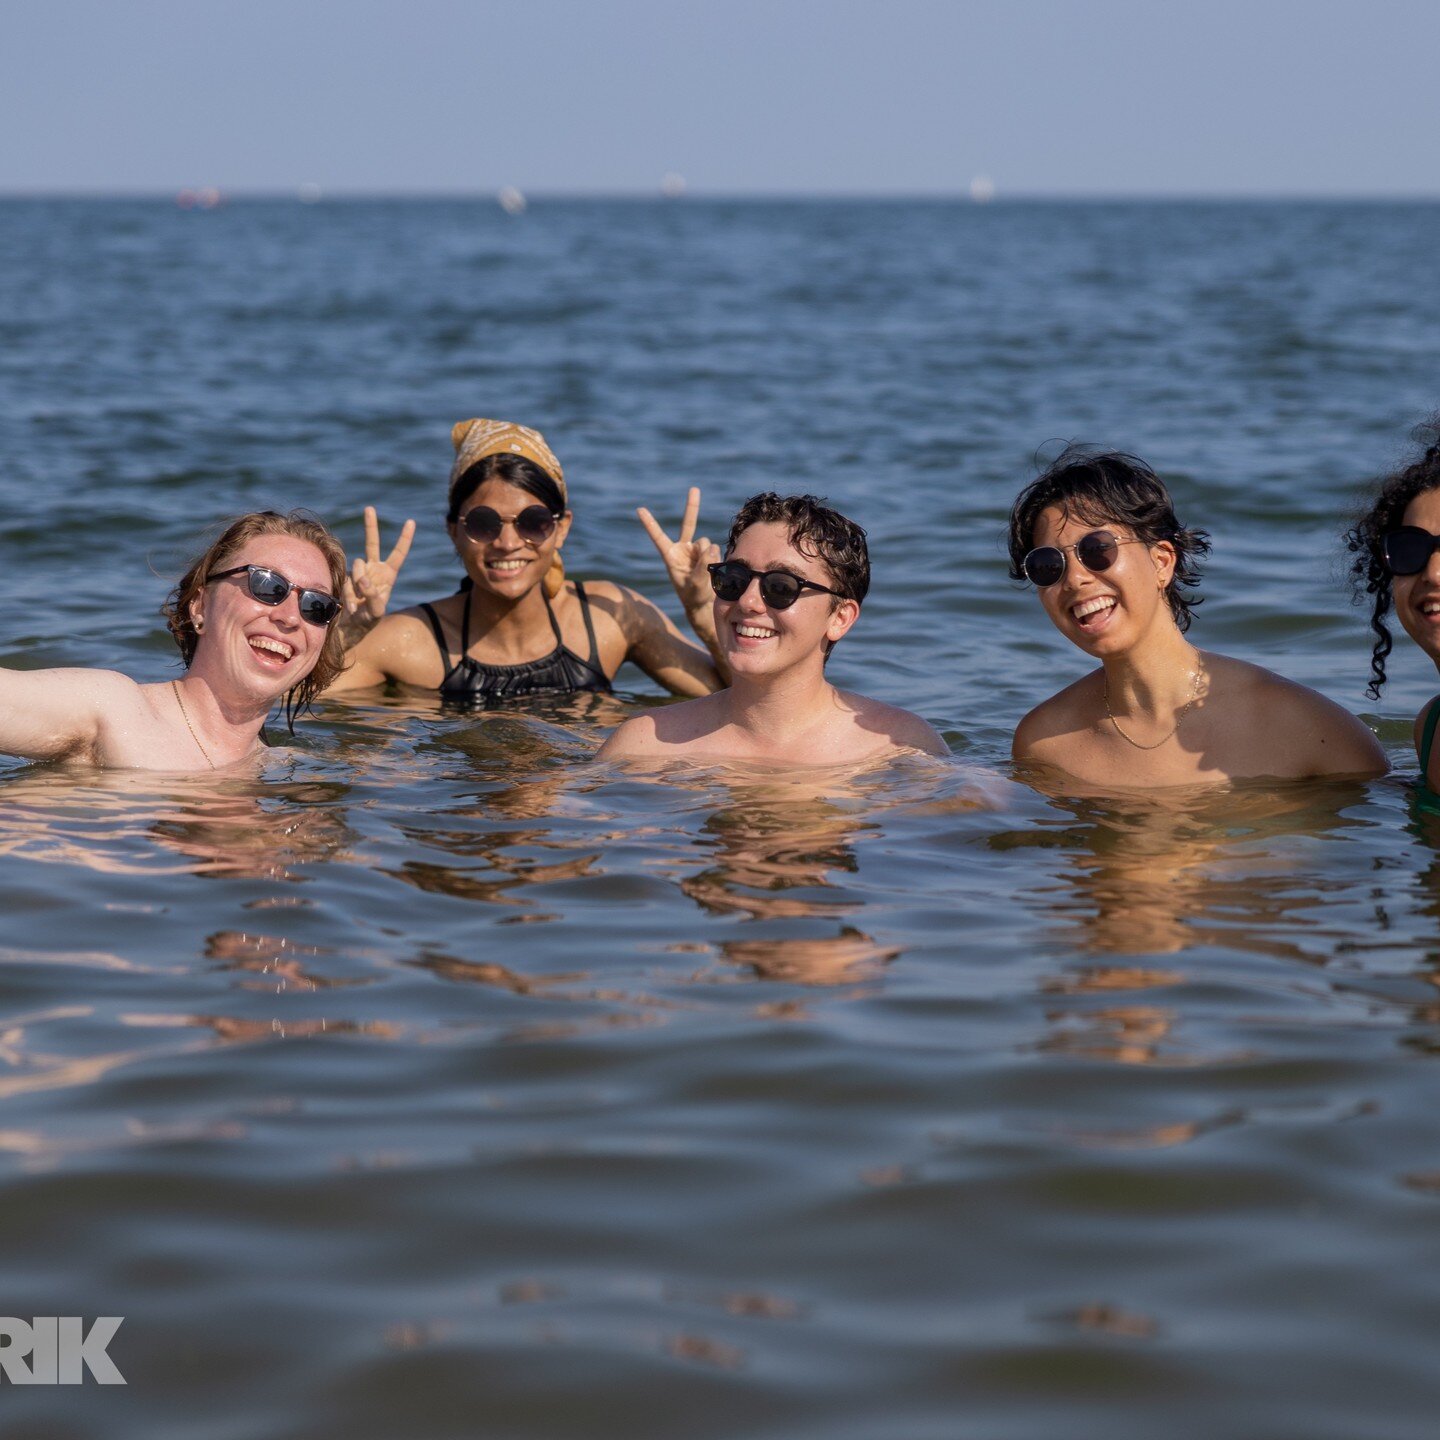 Trans beach day was cute as hell!! Thank you for coming and for sharing your trans joy with us. Think we should do more trans specific events soon? 👀 let us know!!! #nhv

Big shoutout to @peer_pride for co-organizing!! 

Photos: @photo.ellektrik

No